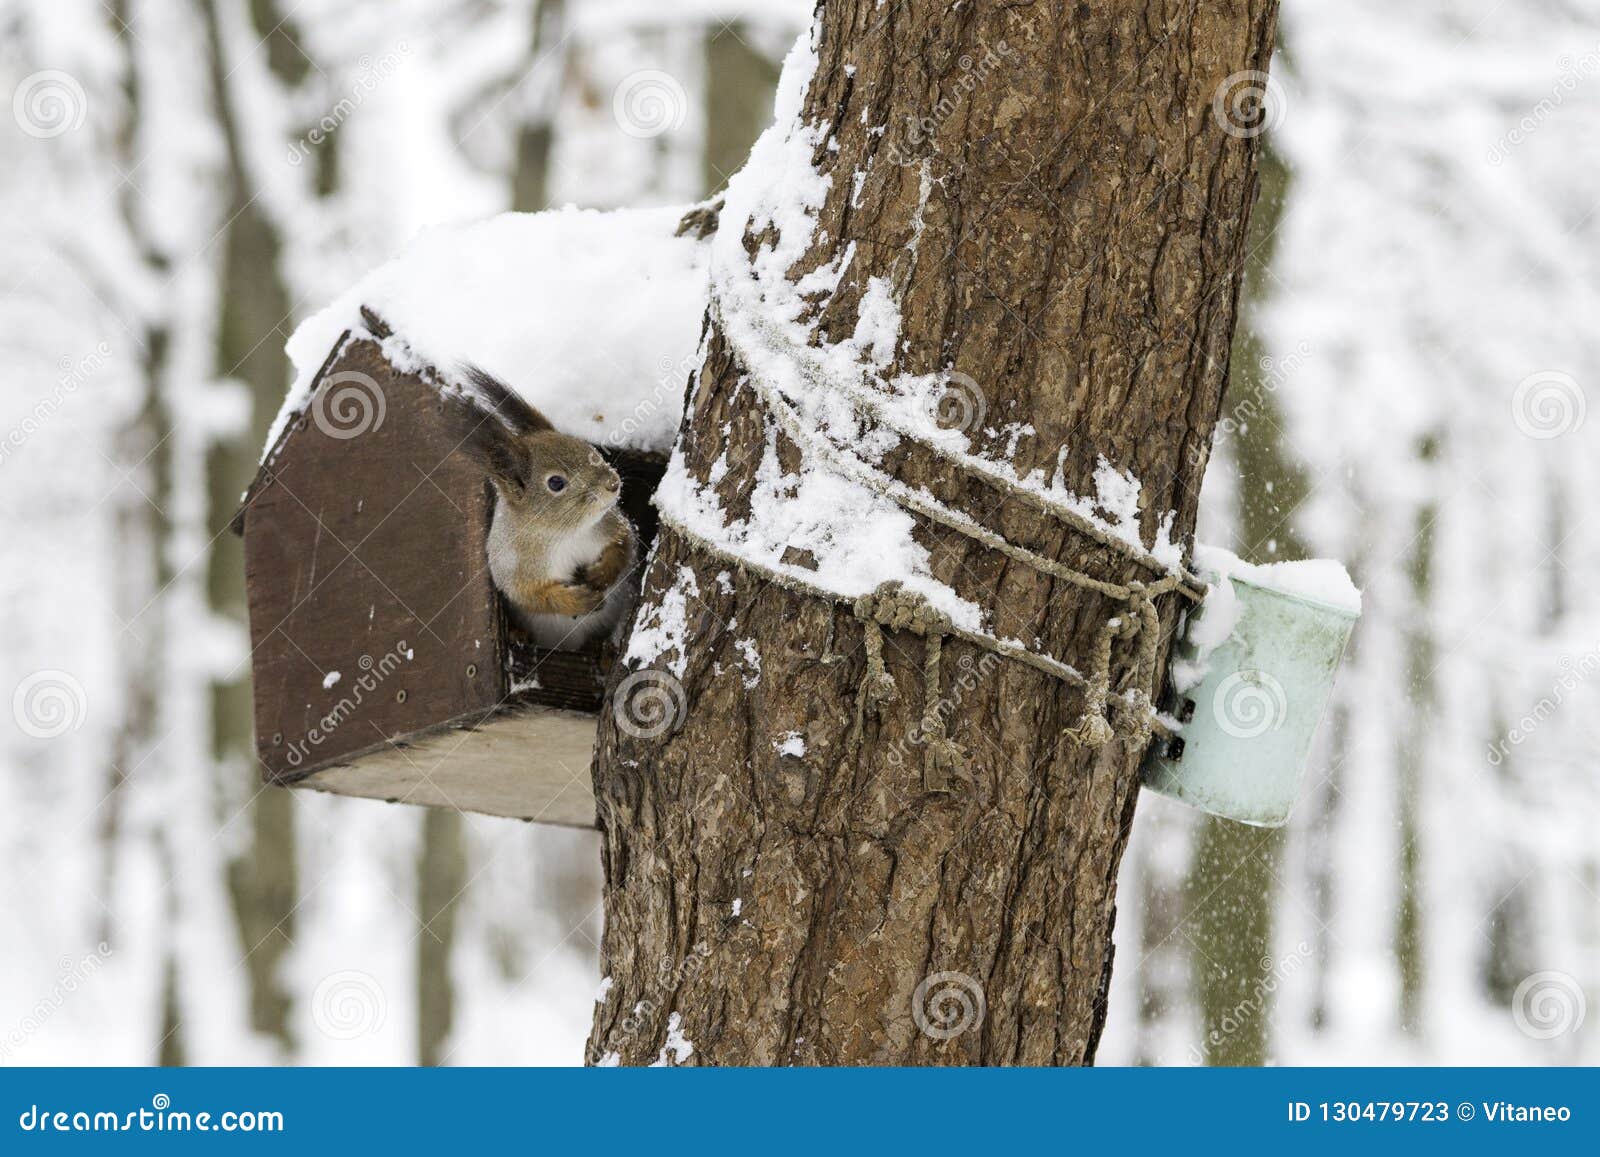 Squirrel In The Winter Forest In A Bird Feeder On The Tree